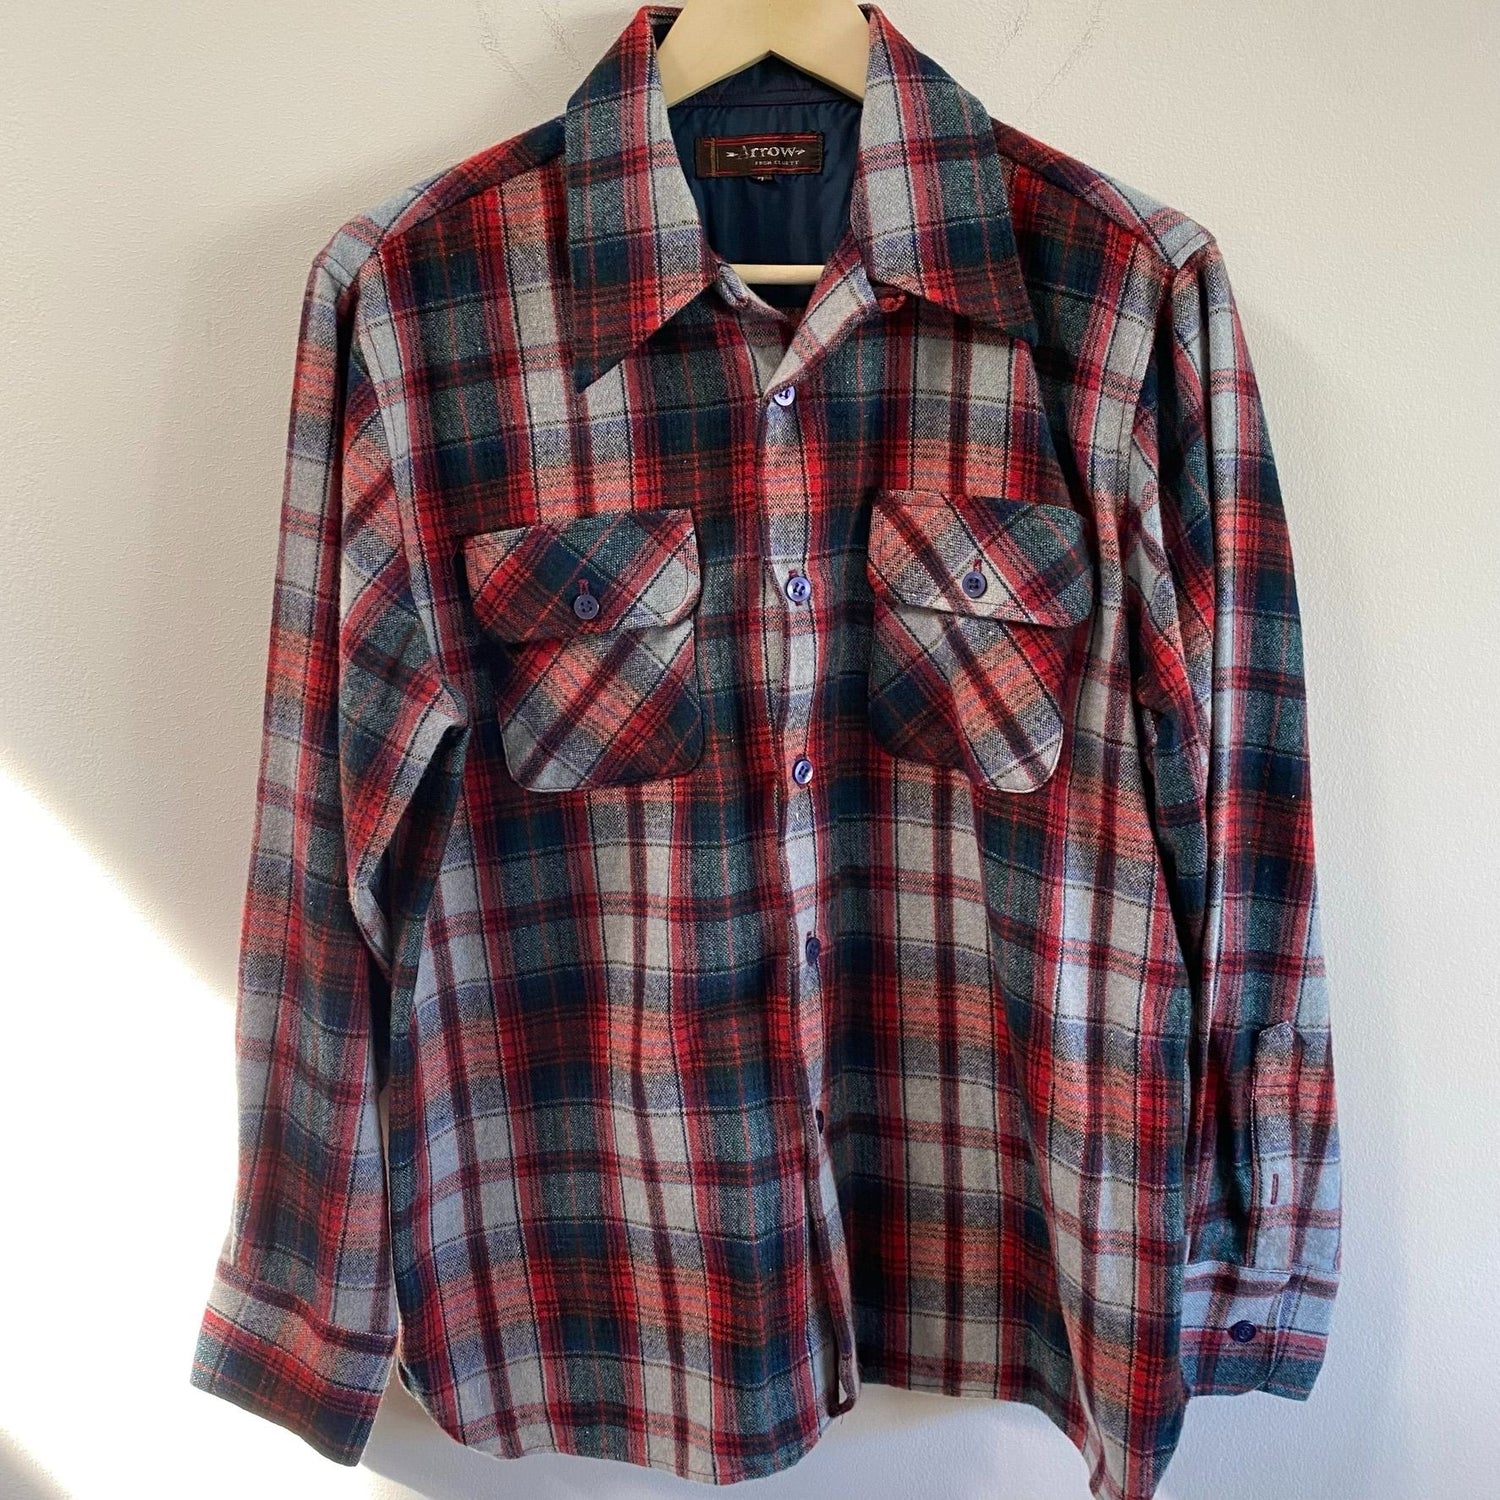 THRIFTED THERMAL PLAID BUTTON-UP